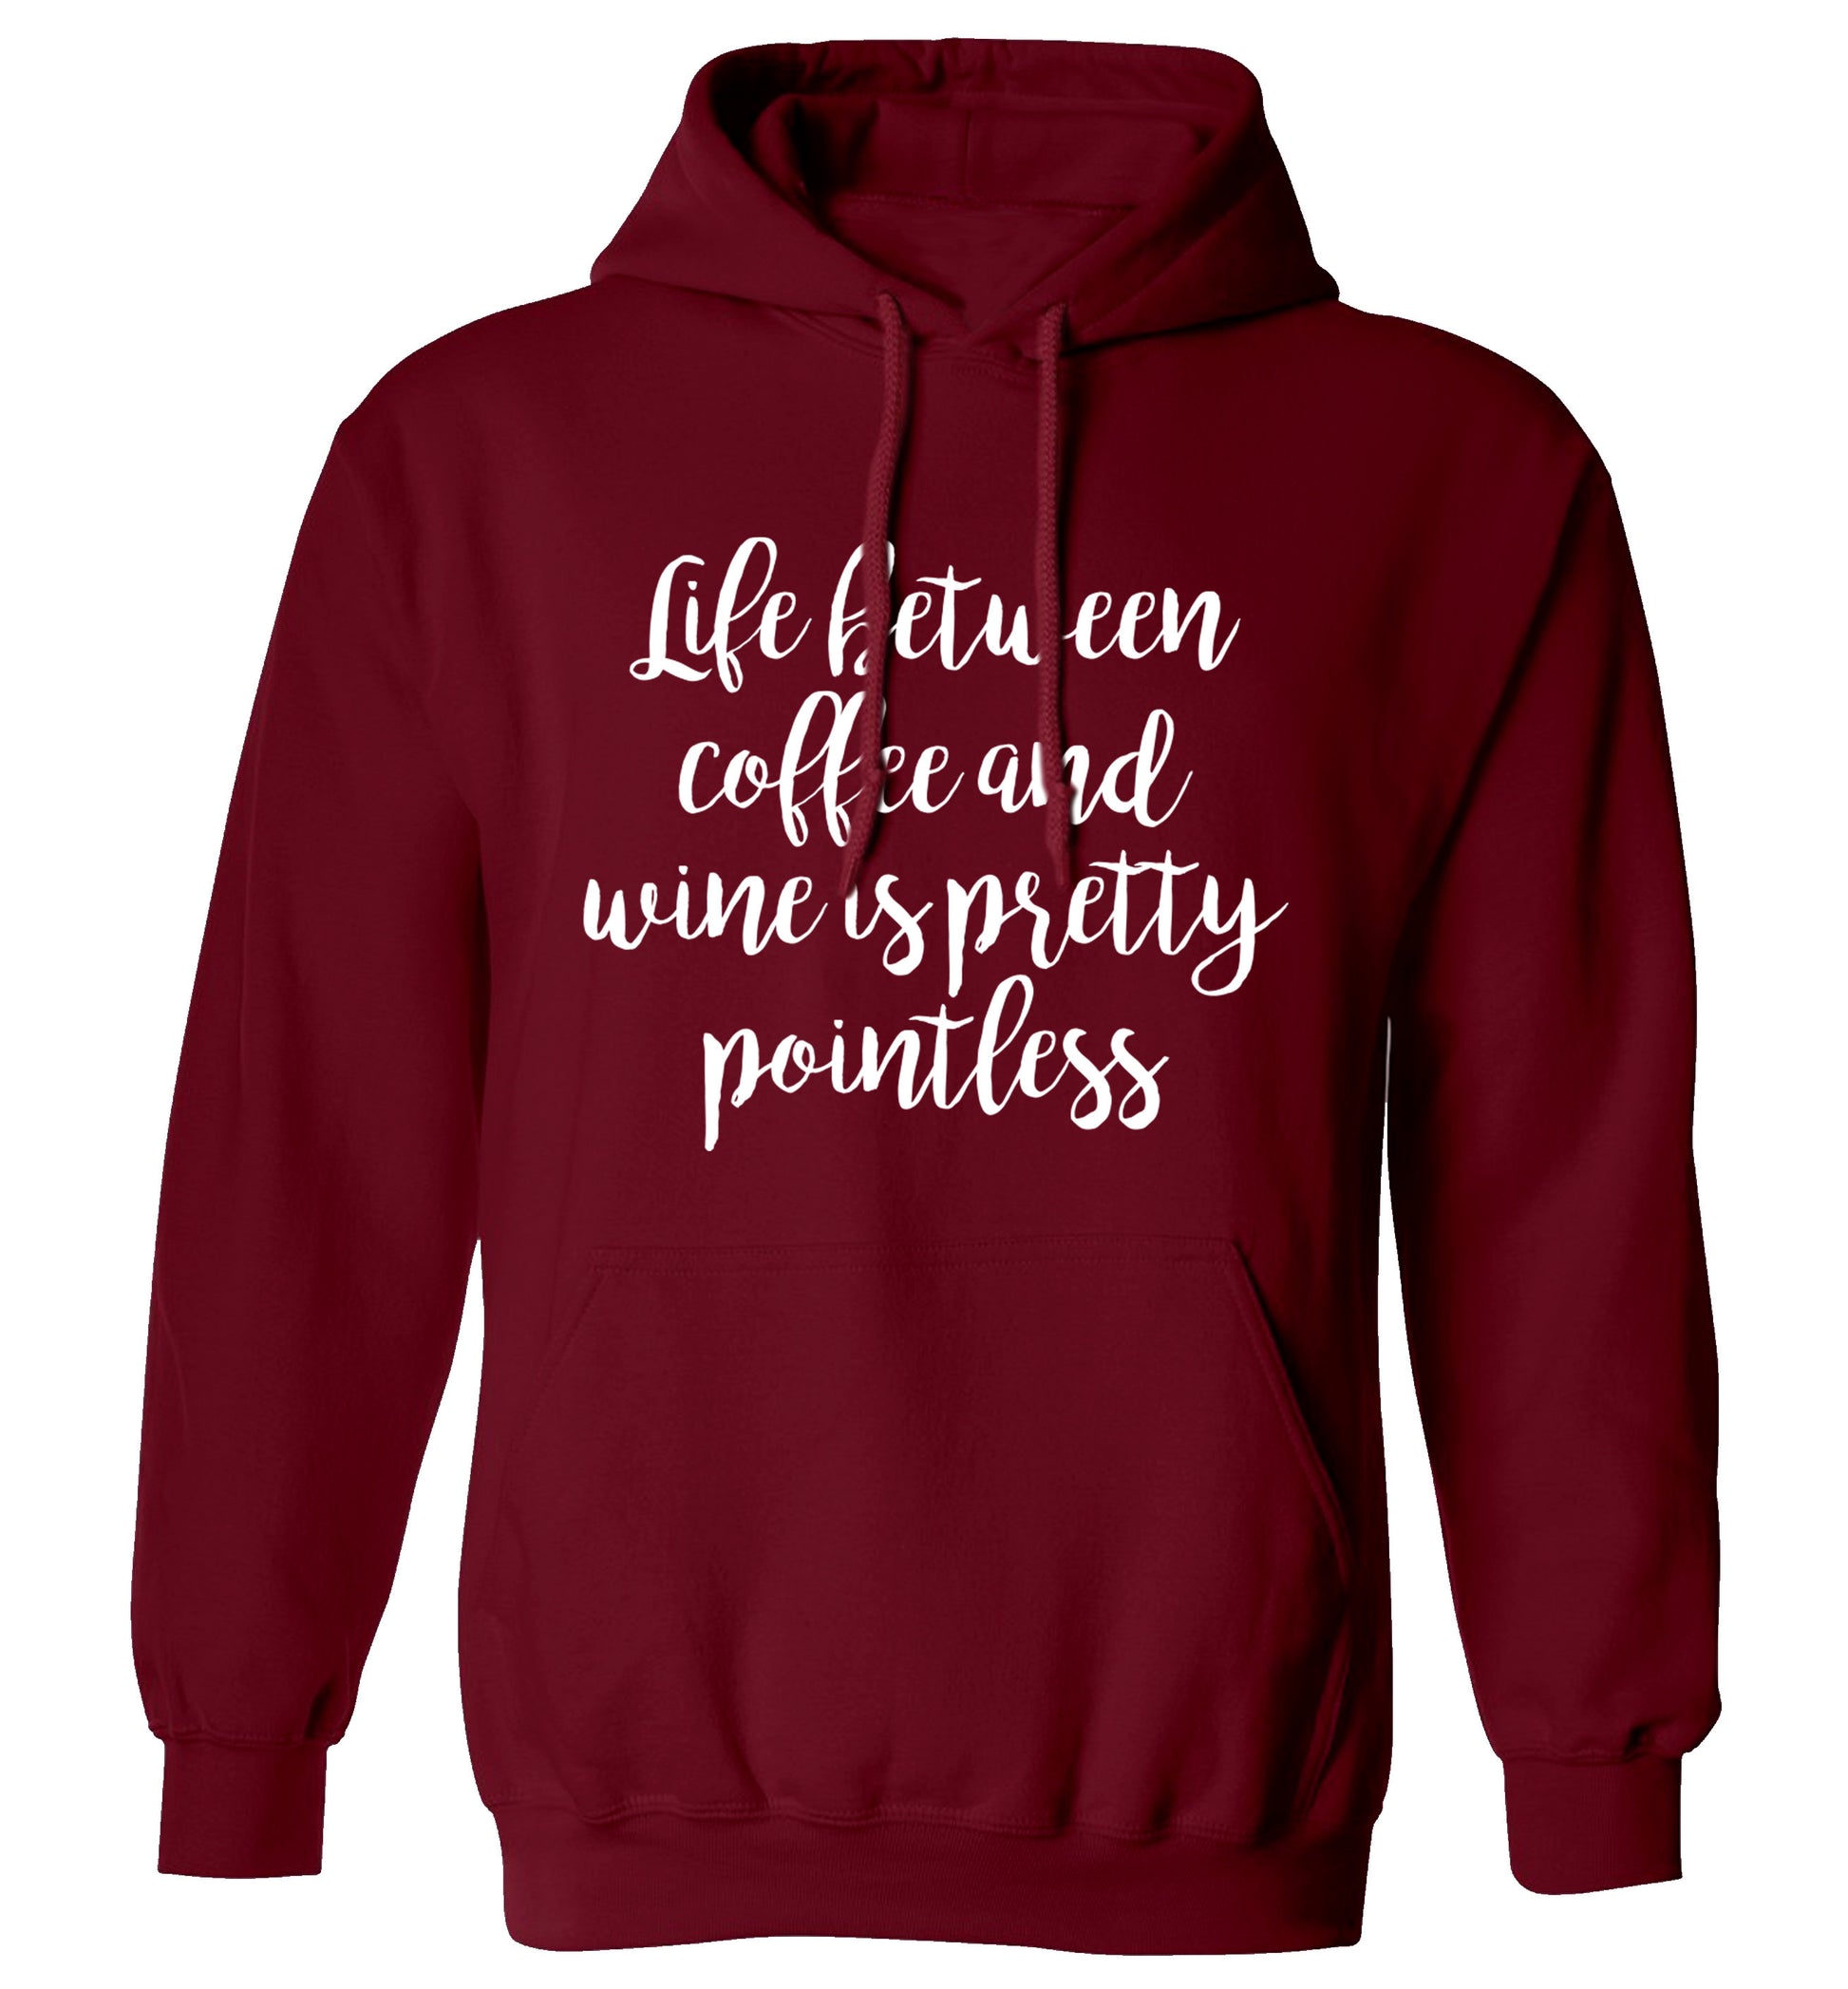 Life between coffee and wine is pretty pointless adults unisex maroon hoodie 2XL